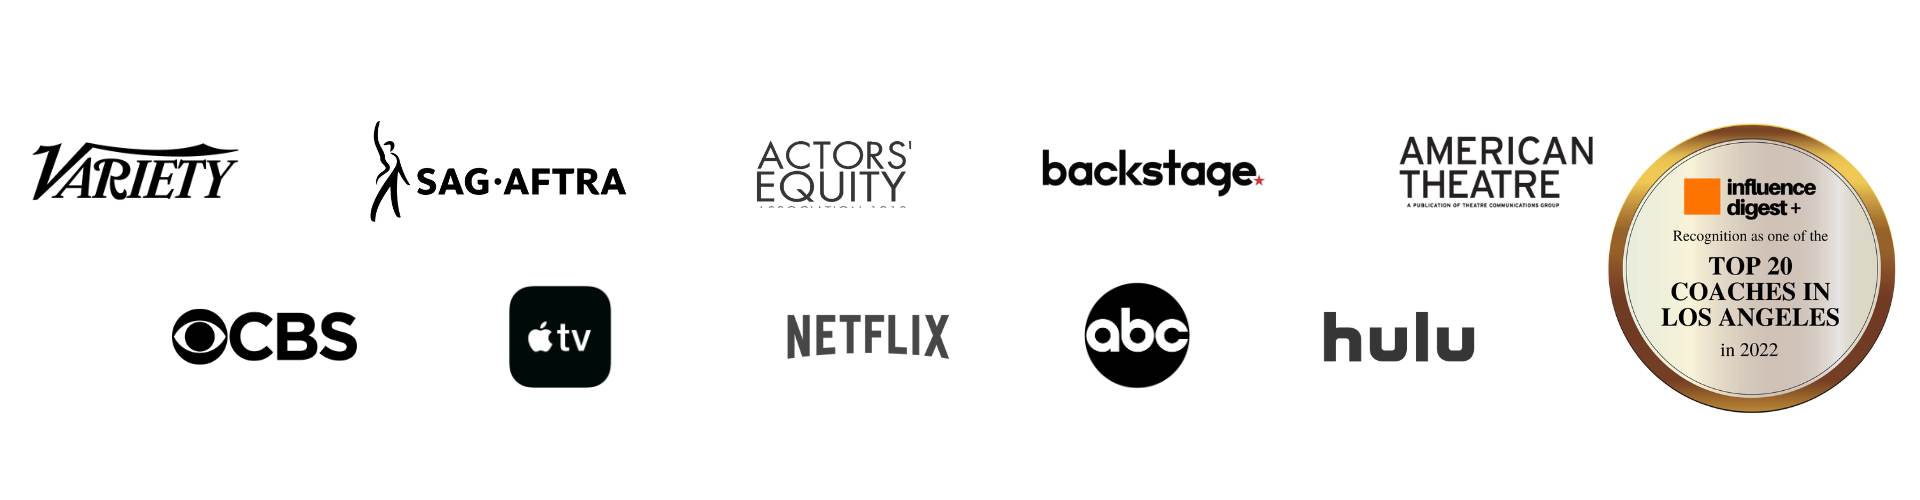 Various logos for different media organization including Variety, SAG Aftra, Actors' Equity, backstage, American Theatre, CBS, Apple TV, Netflix, ABC, Hulu, Influence digest + (Top 20 Coaches in Los Angeles in 2022)